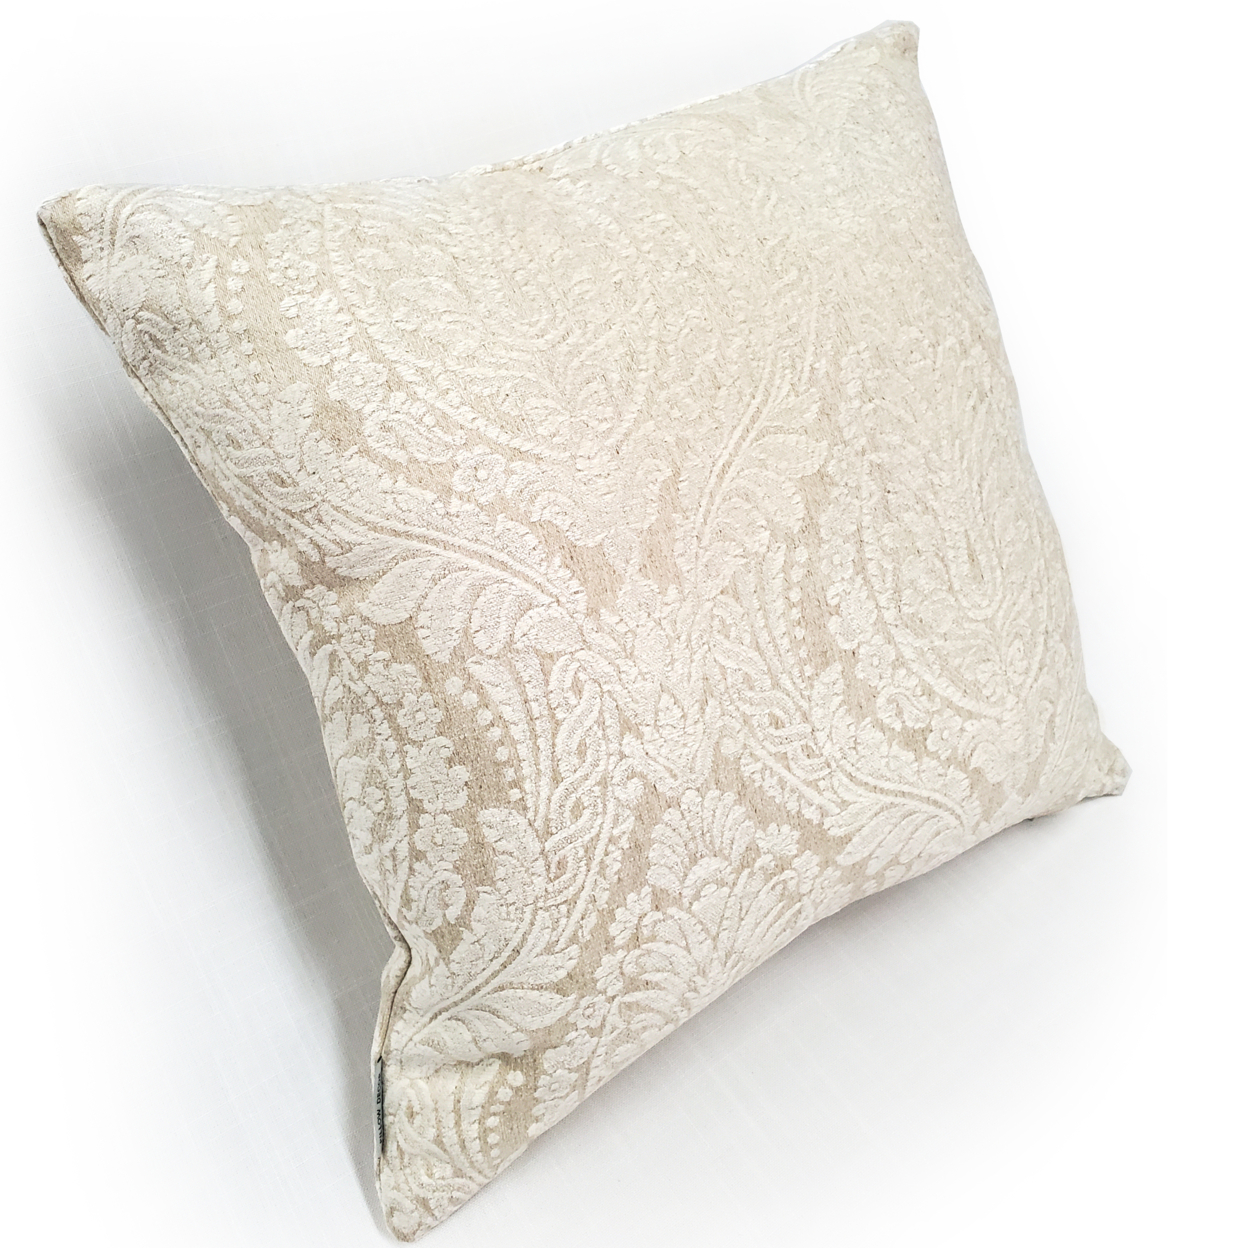 Jacquard Damask In Cream Throw Pillow 19x19, With Polyfill Insert